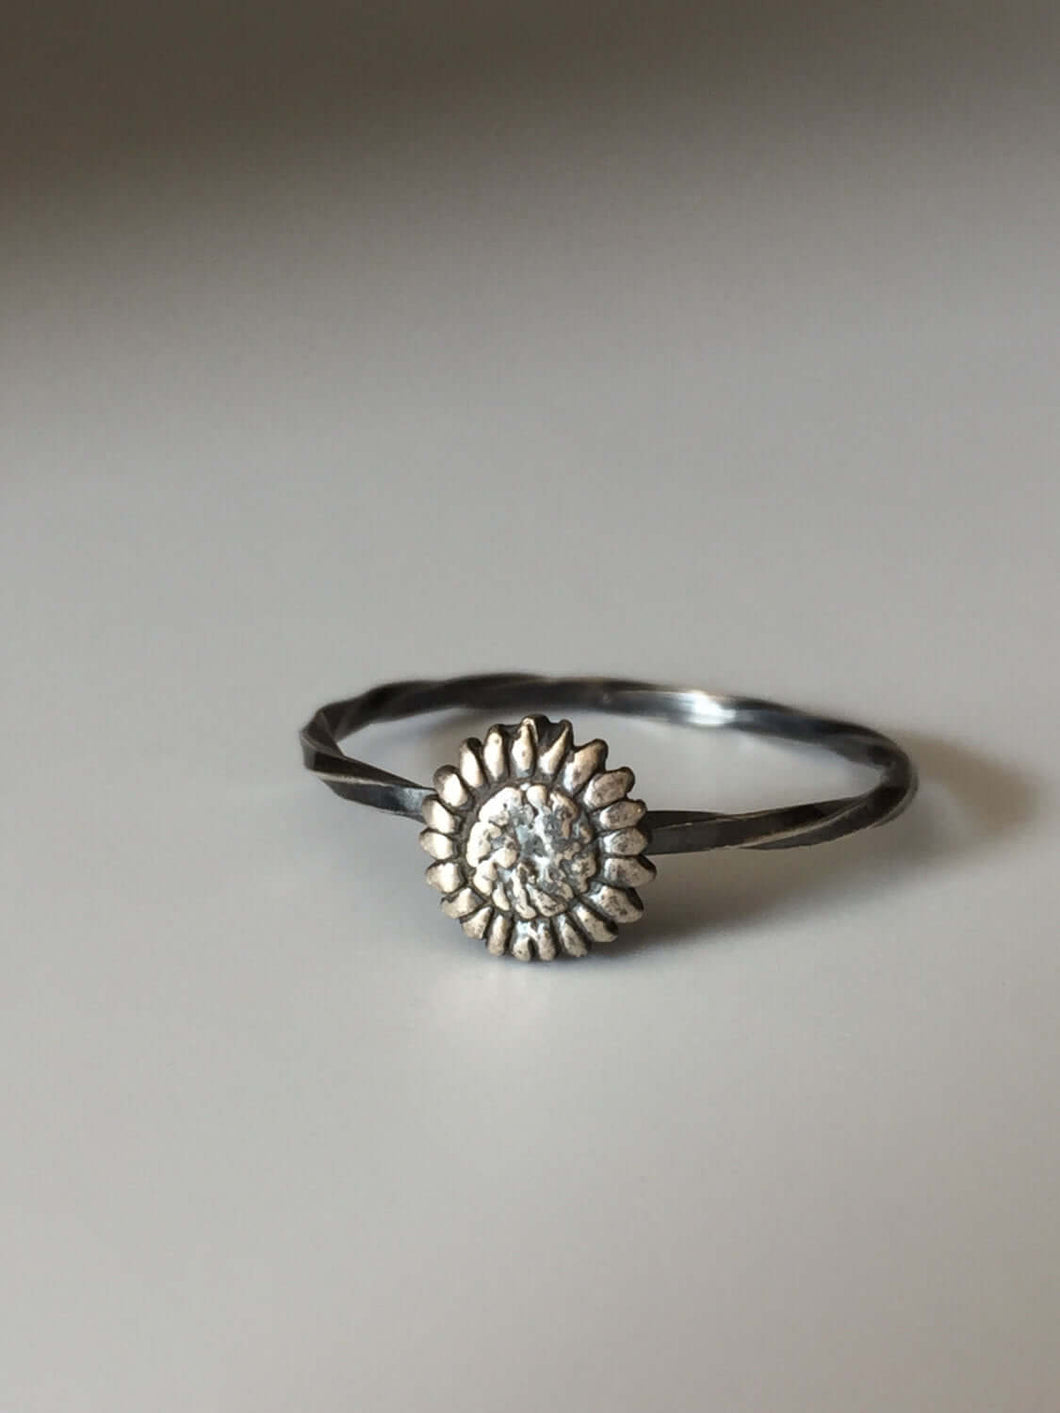 Sunflower Stacking Ring. Sterling silver stacker jewelry mix and match. Hippie flower child jewelry.